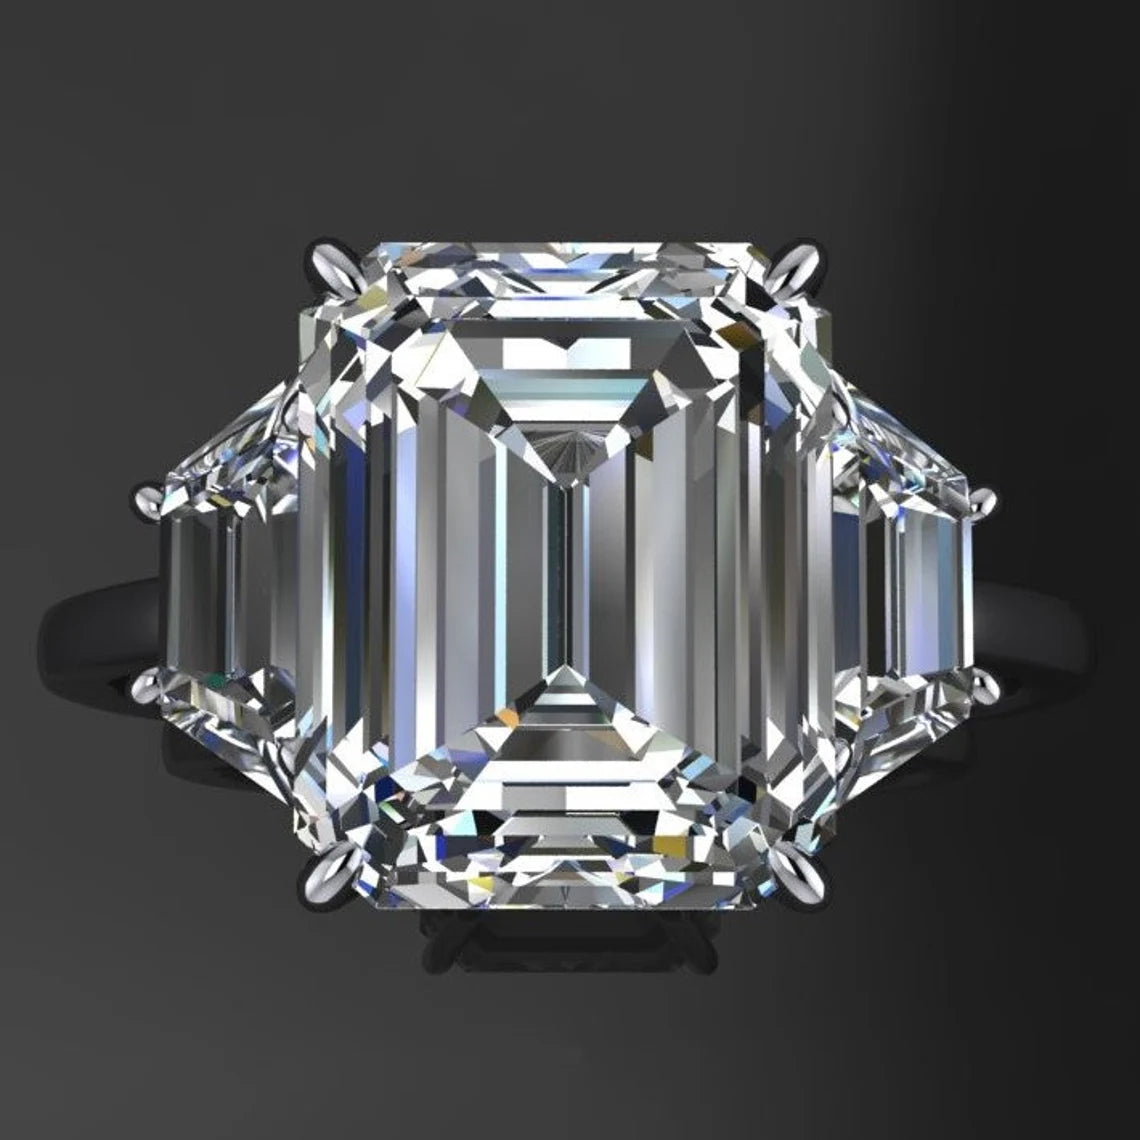 demi ring - three stone emerald cut NEO moissanite engagement ring, trapezoid side stones - J Hollywood Designs